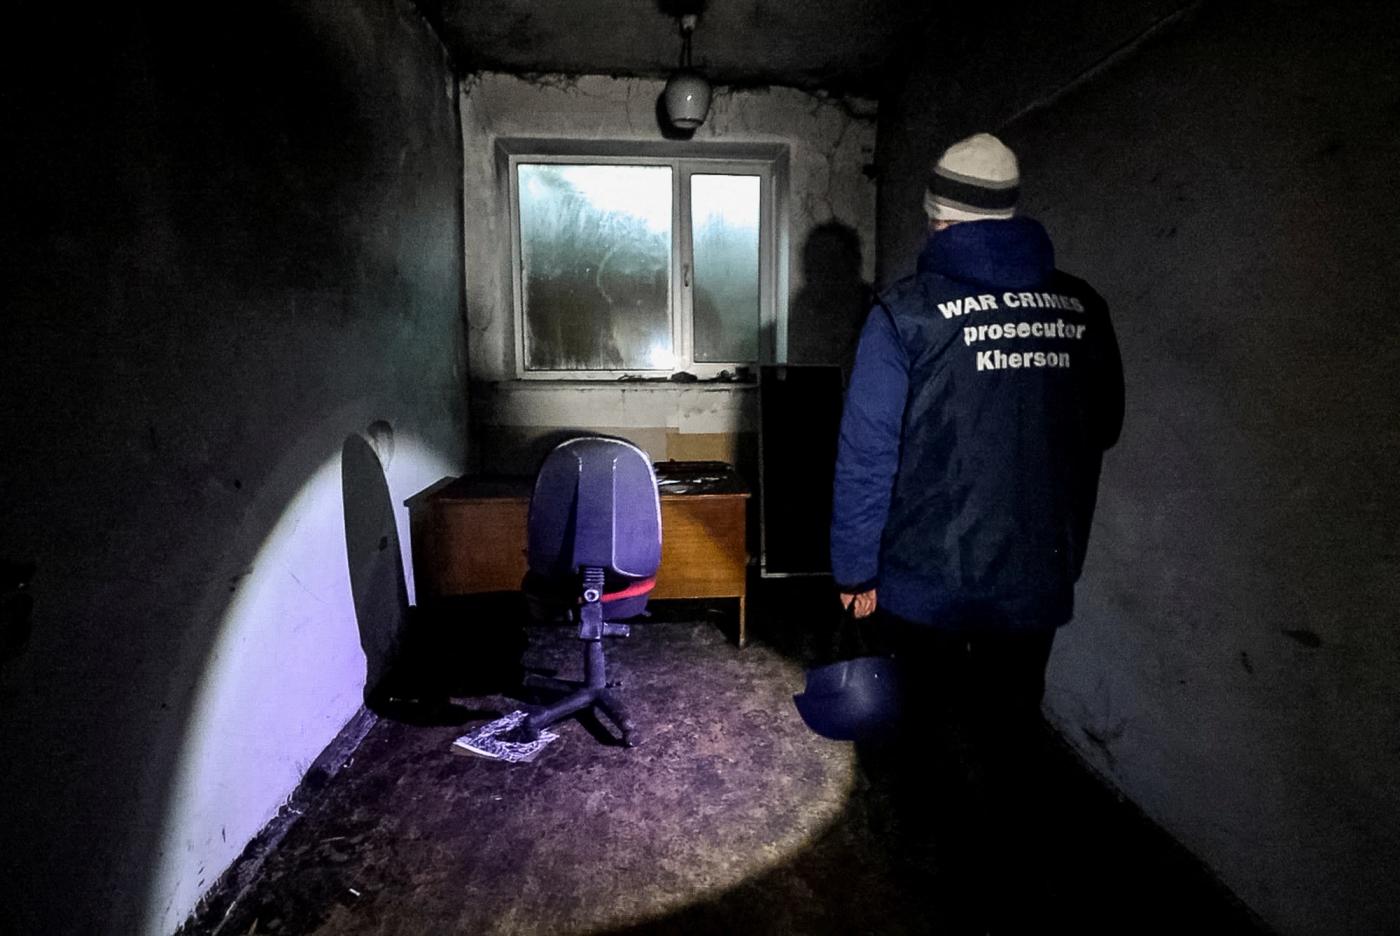 A war crime prosecutor inspects a basement where prosecutor's office says 30 people were held for two months during the Russian occupation, amid Russia's attack on Ukraine, in Kherson, Ukraine December 20, 2022.